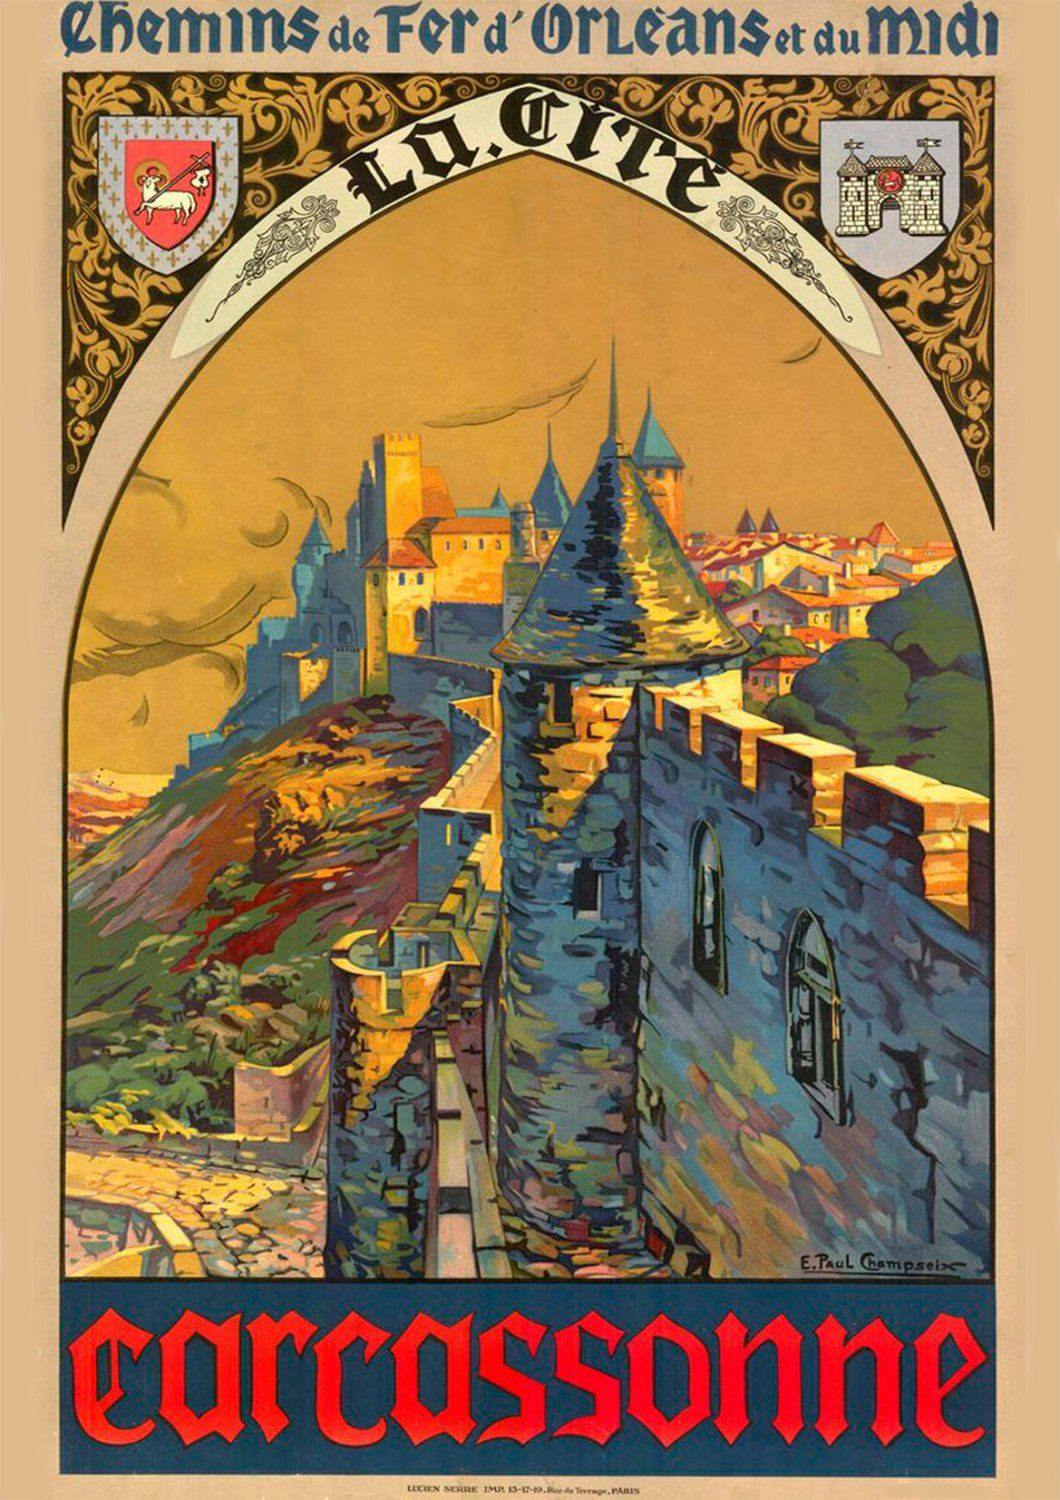 CARCASSONNE TRAVEL POSTER: French Languedoc Hilltop Citadel Advert - Pimlico Prints